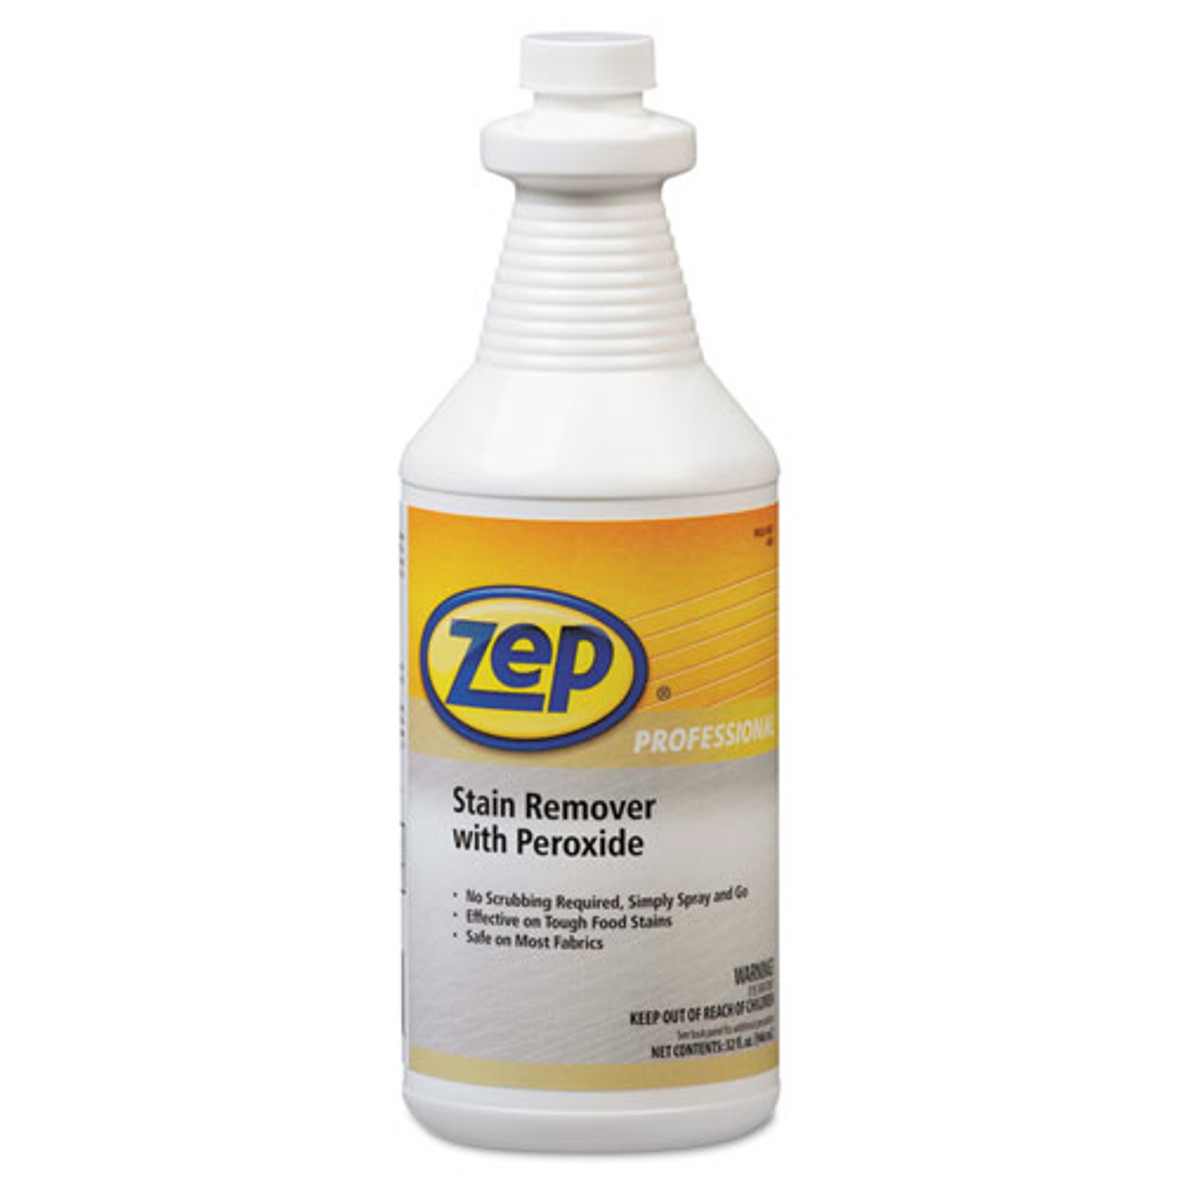 Zep Professional Stain Remover with Peroxide